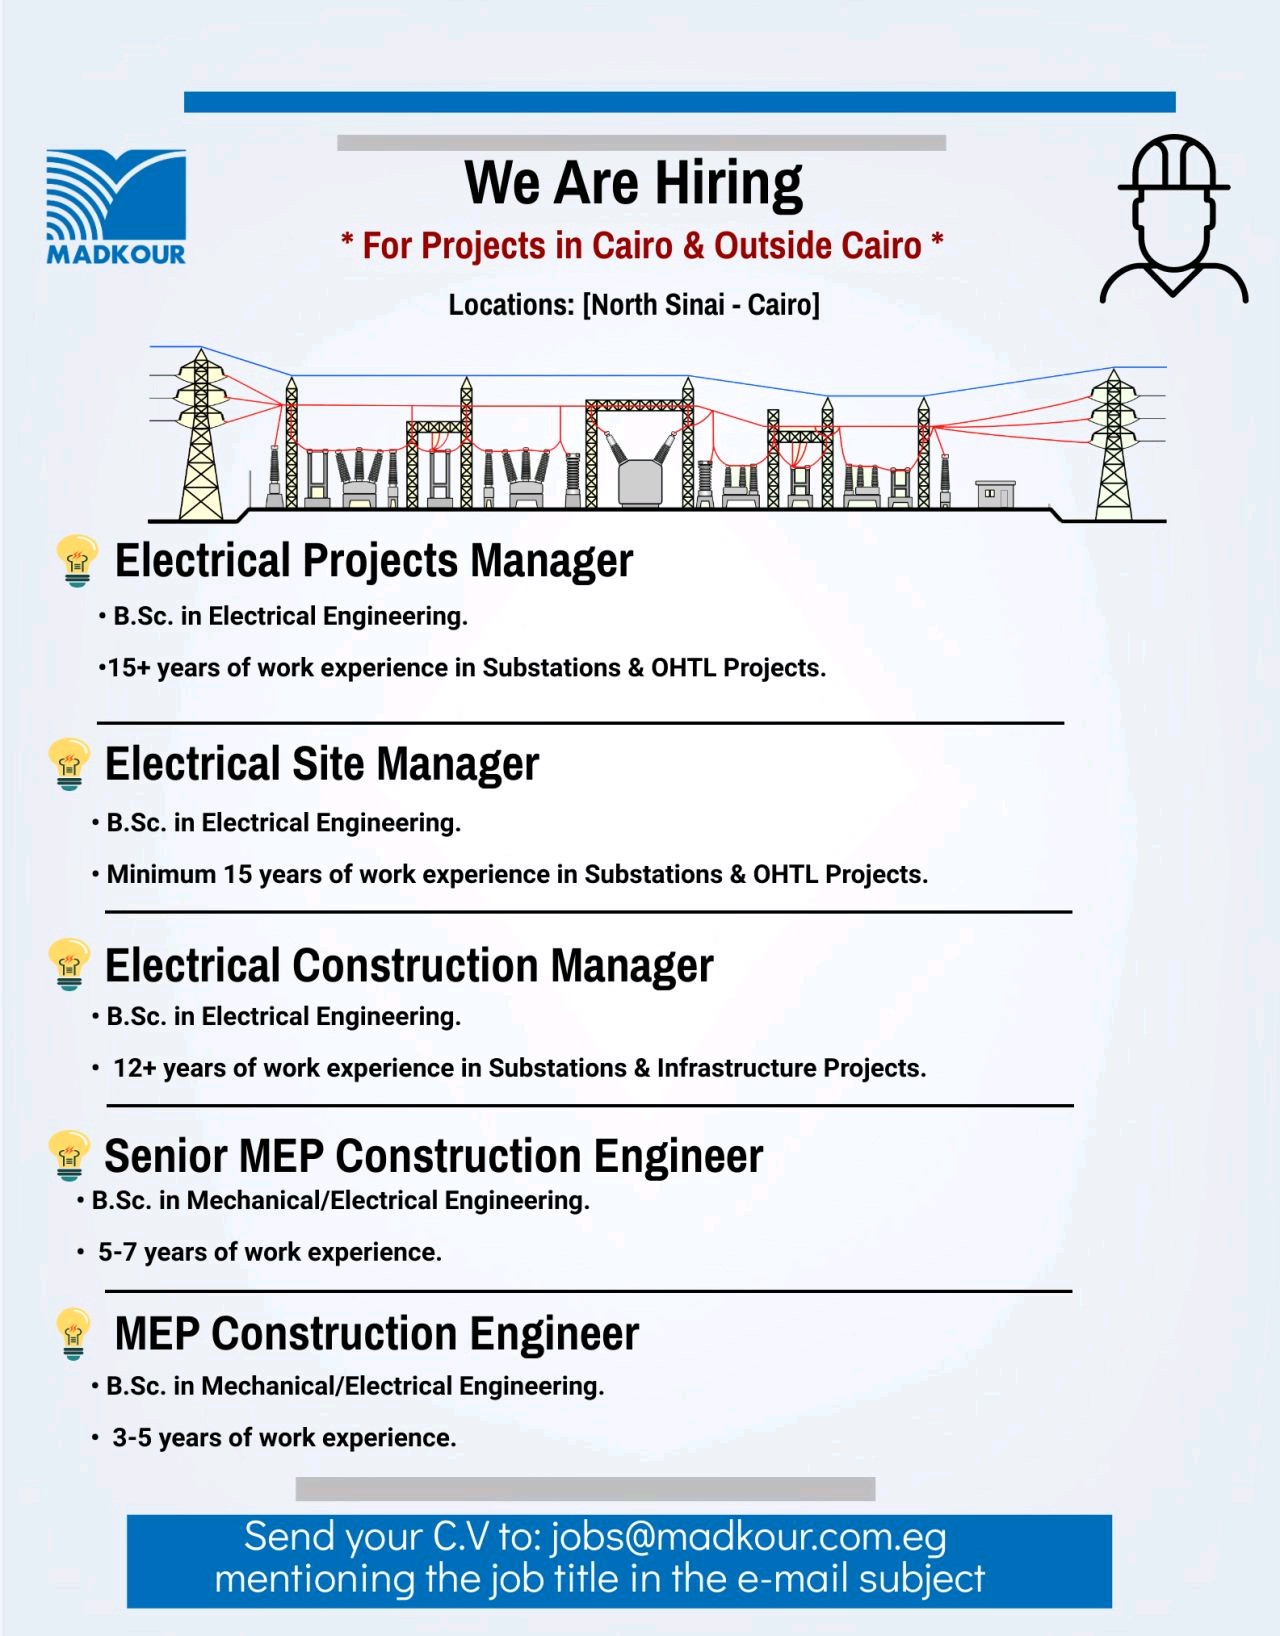 Electrical, Project, Construction & MEP Construction Engineer Jobs